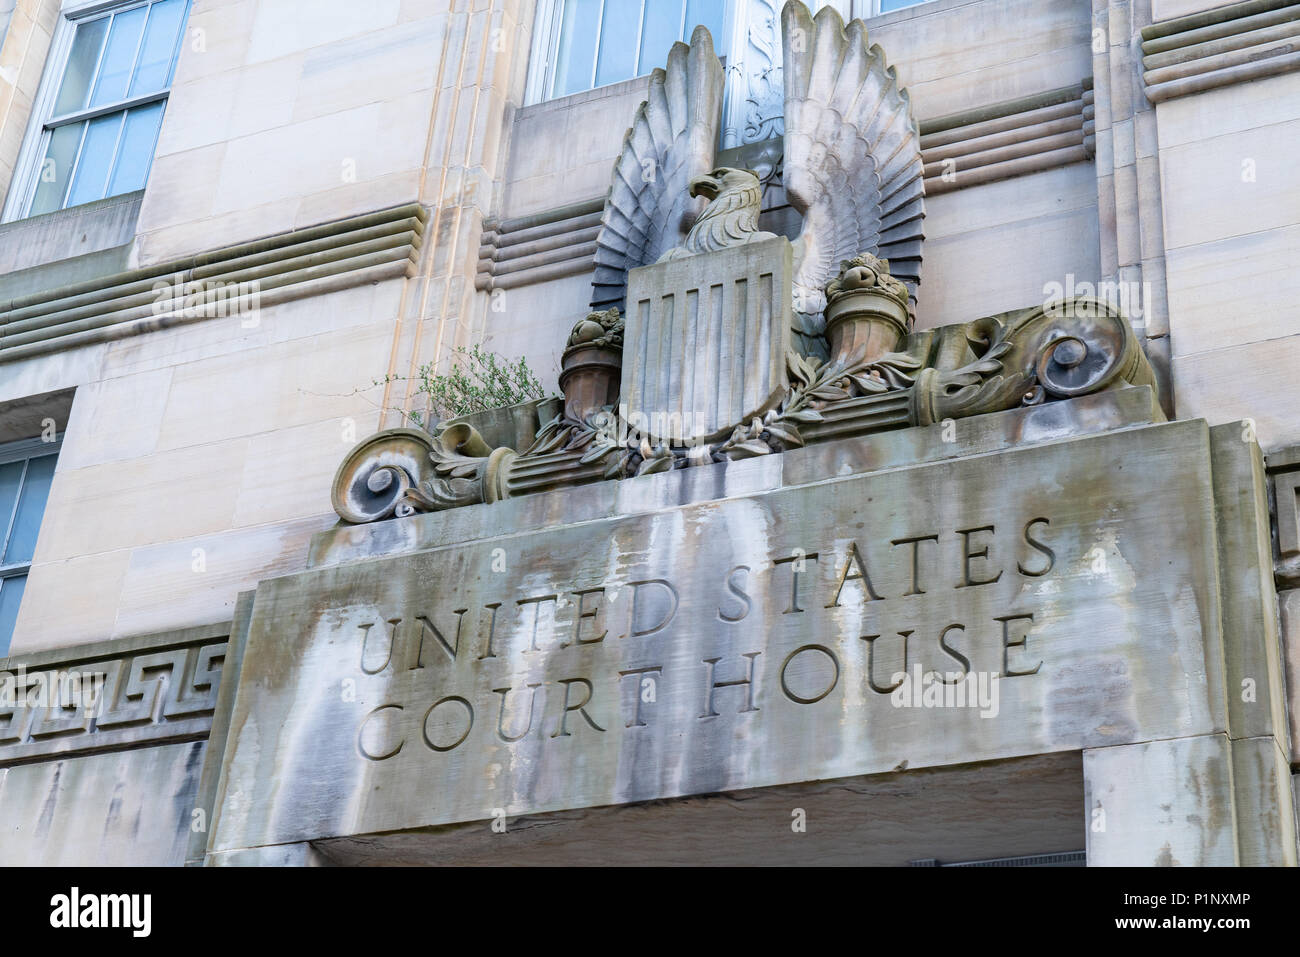 Facade of United States Court House in Buffalo, New York Stock Photo